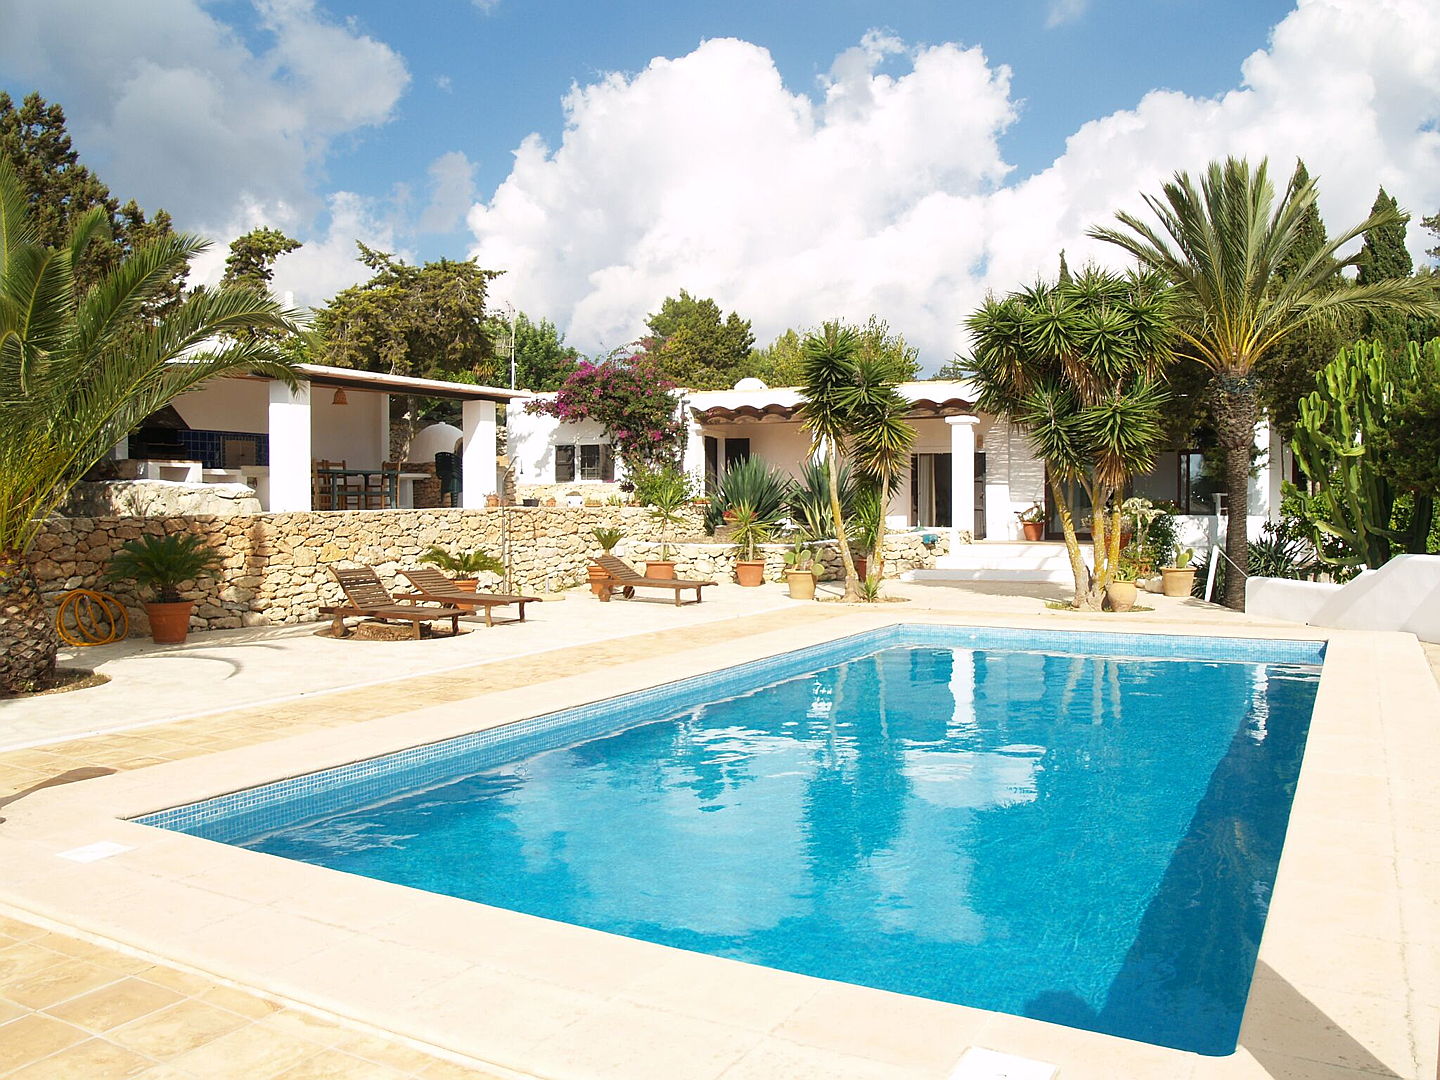  Ibiza
- Villa for sale with pool and palm trees (San José)